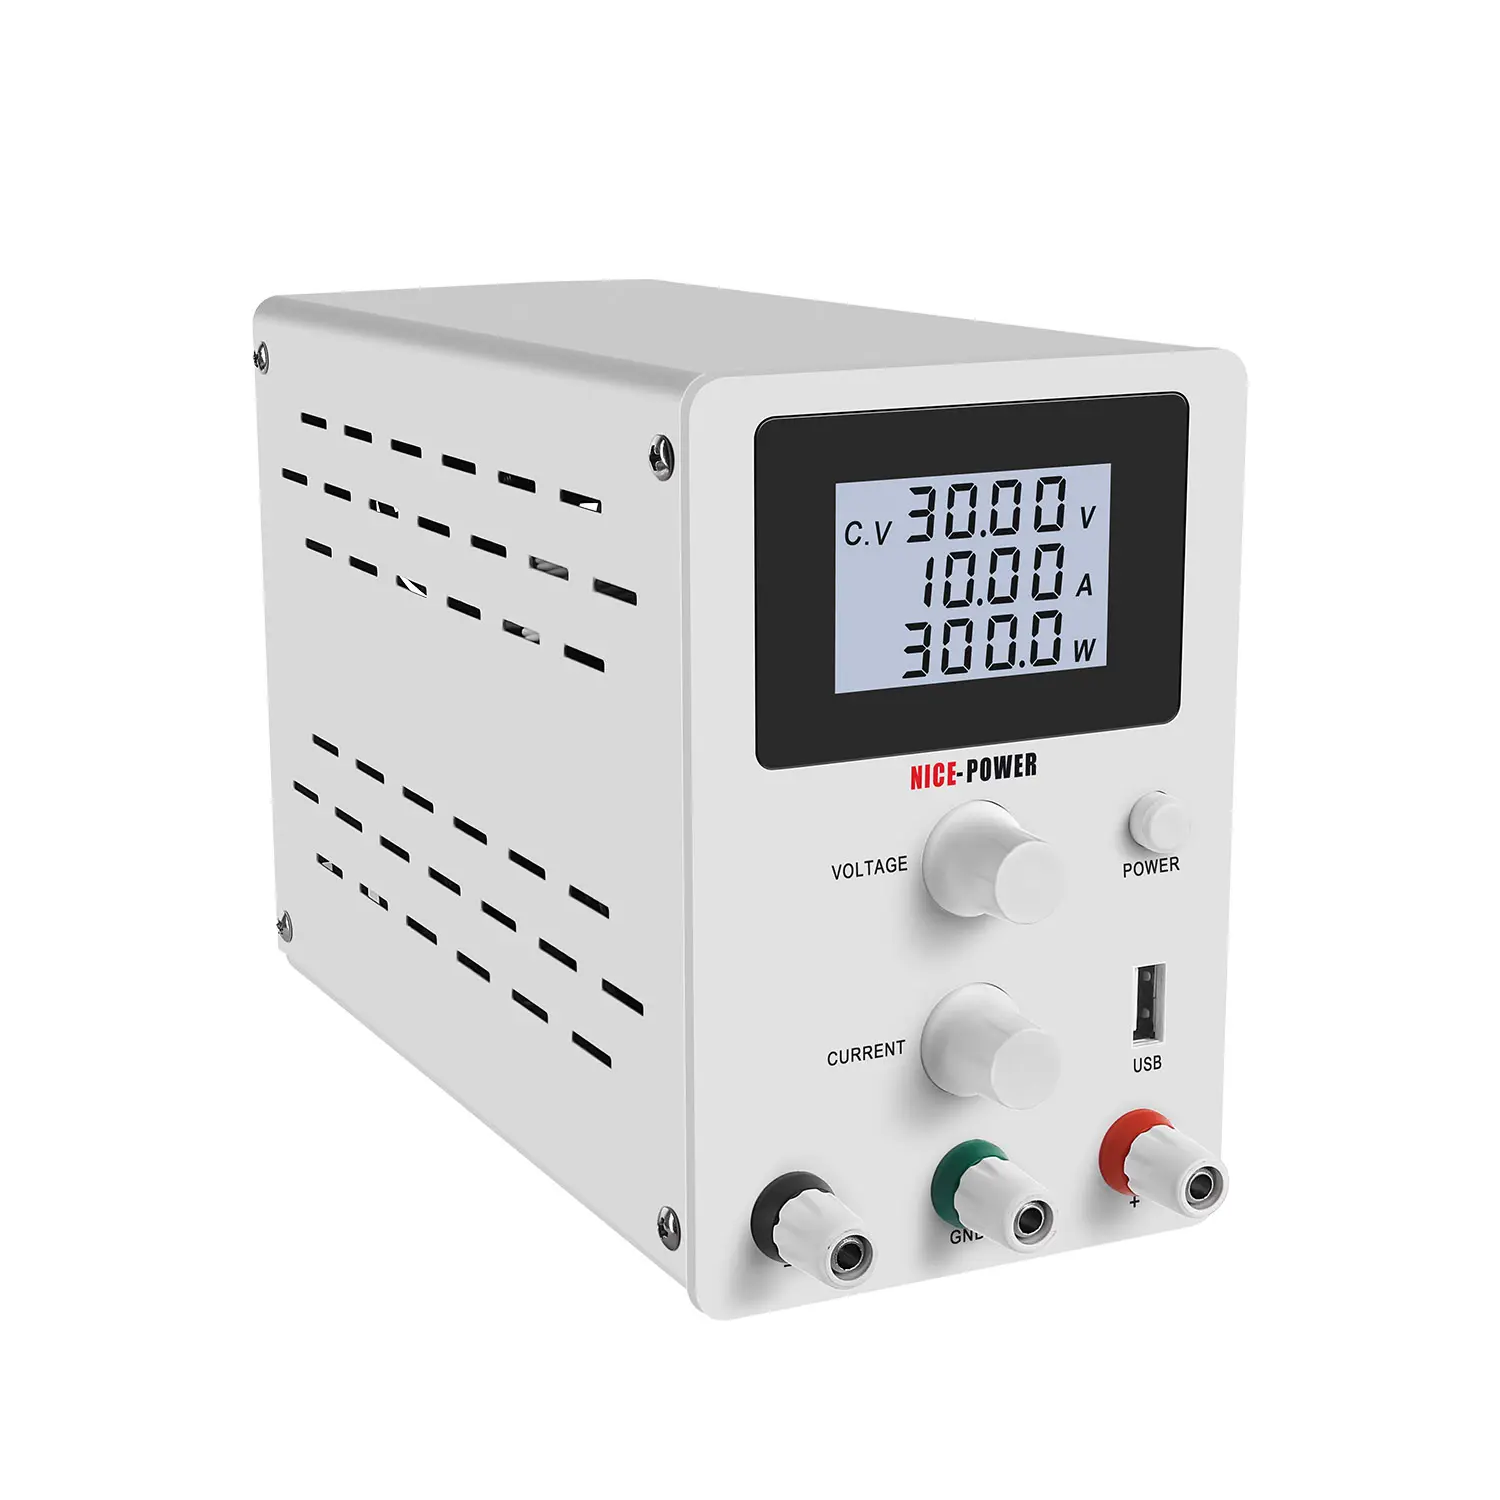 R-SPS3010D Factory Price DC Regulated Power Supply 30V 10A Digital Adjustable Switching Lab Test Repair Power Souce